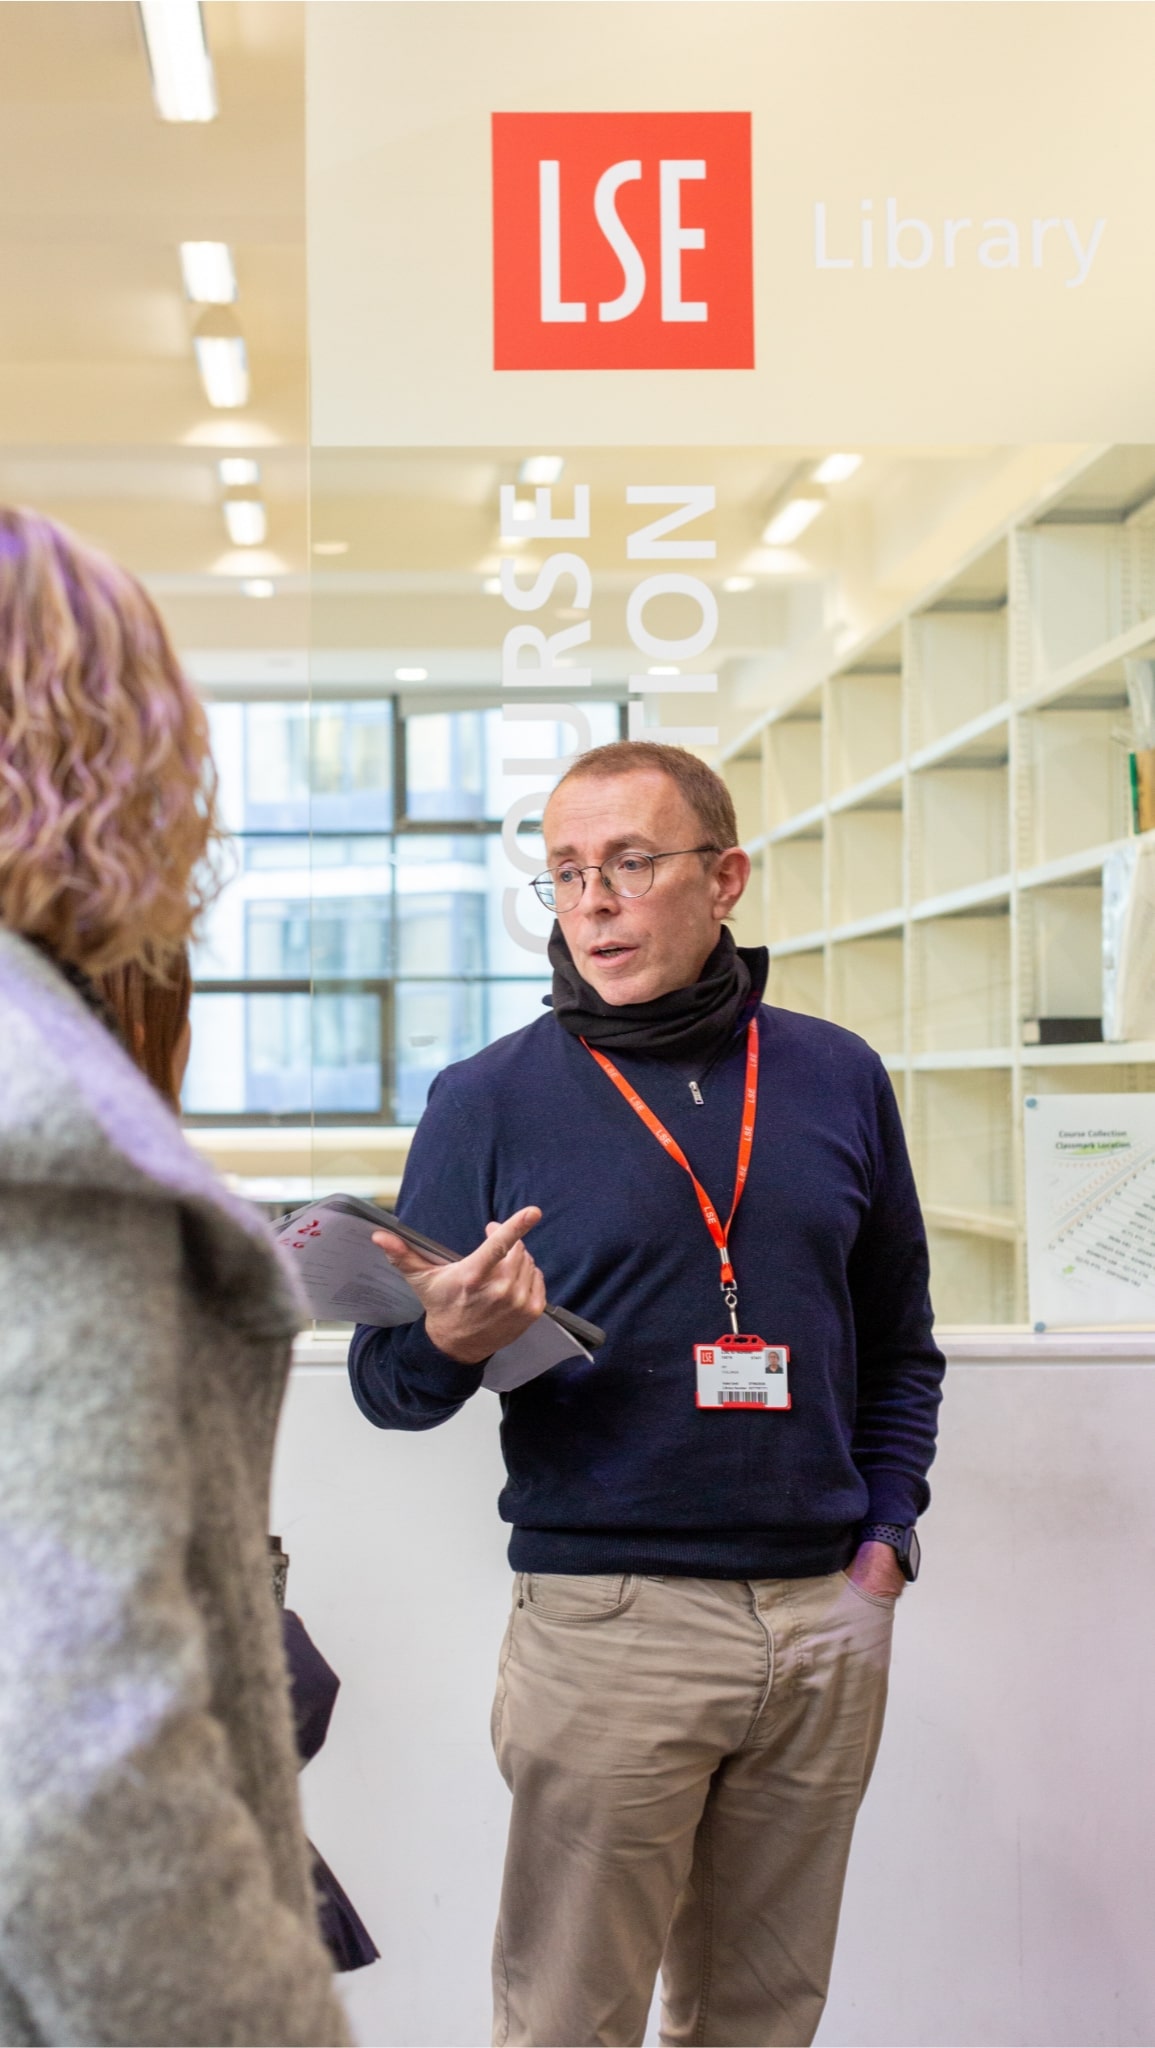 A member of staff giving a tour of LSE Library.